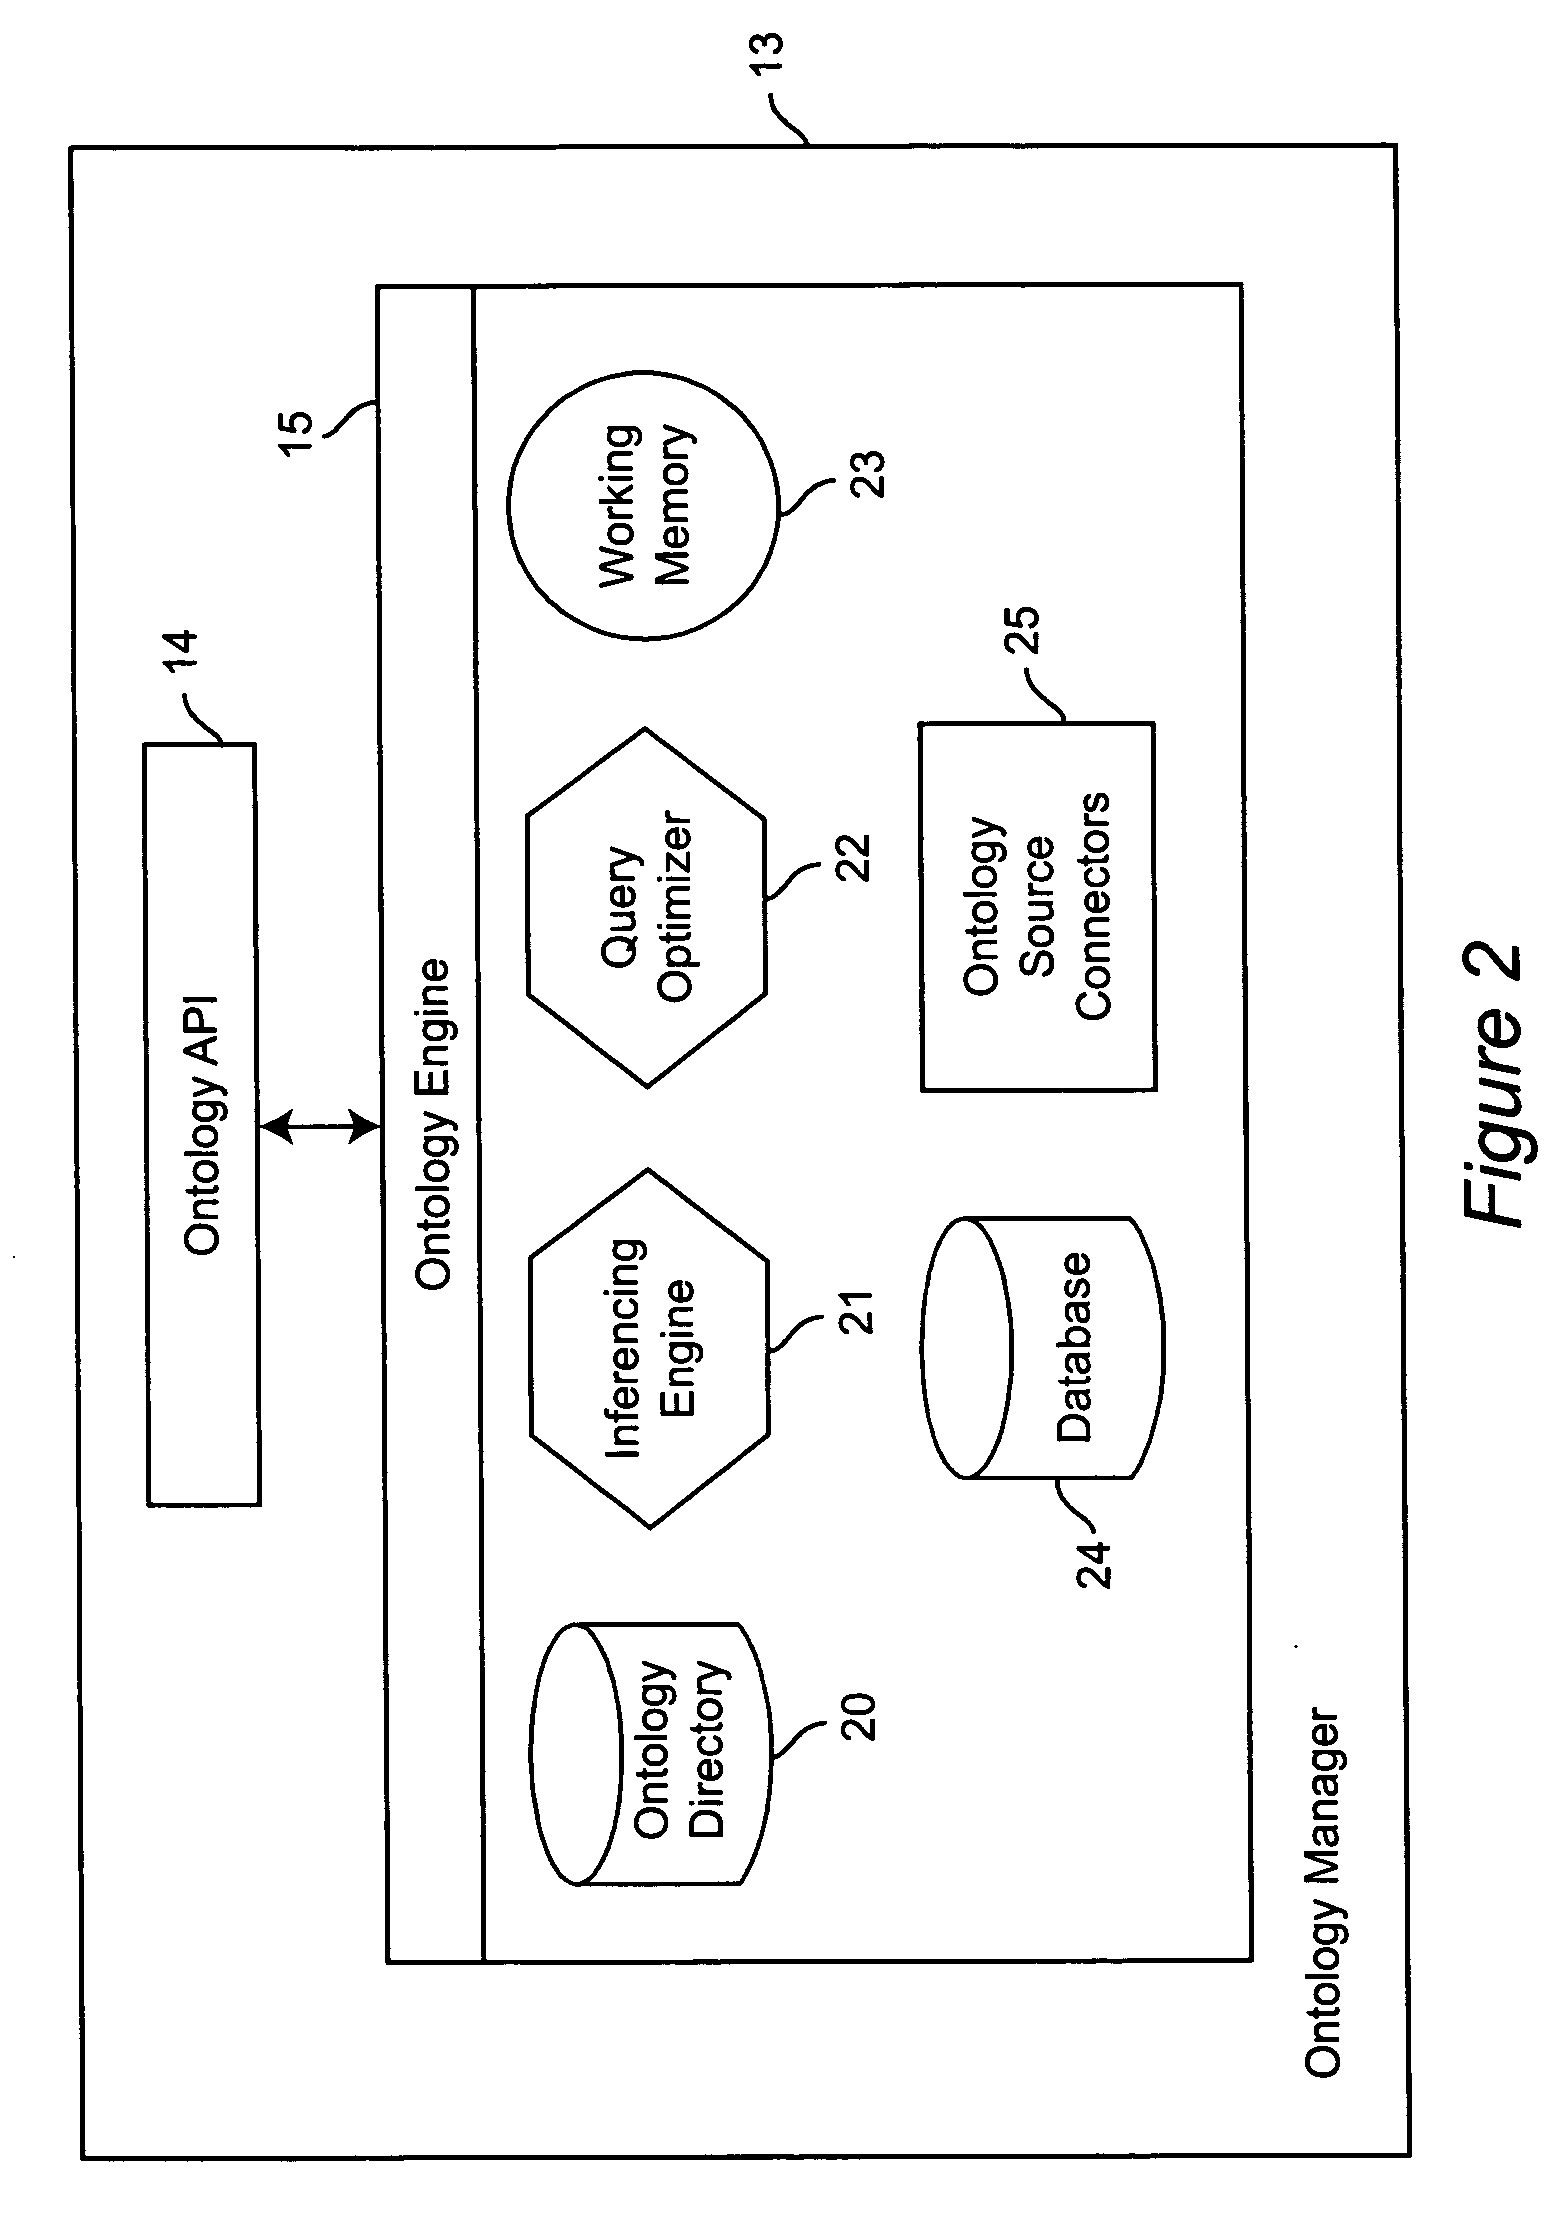 Apparatus and method for managing and inferencing contextual relationships